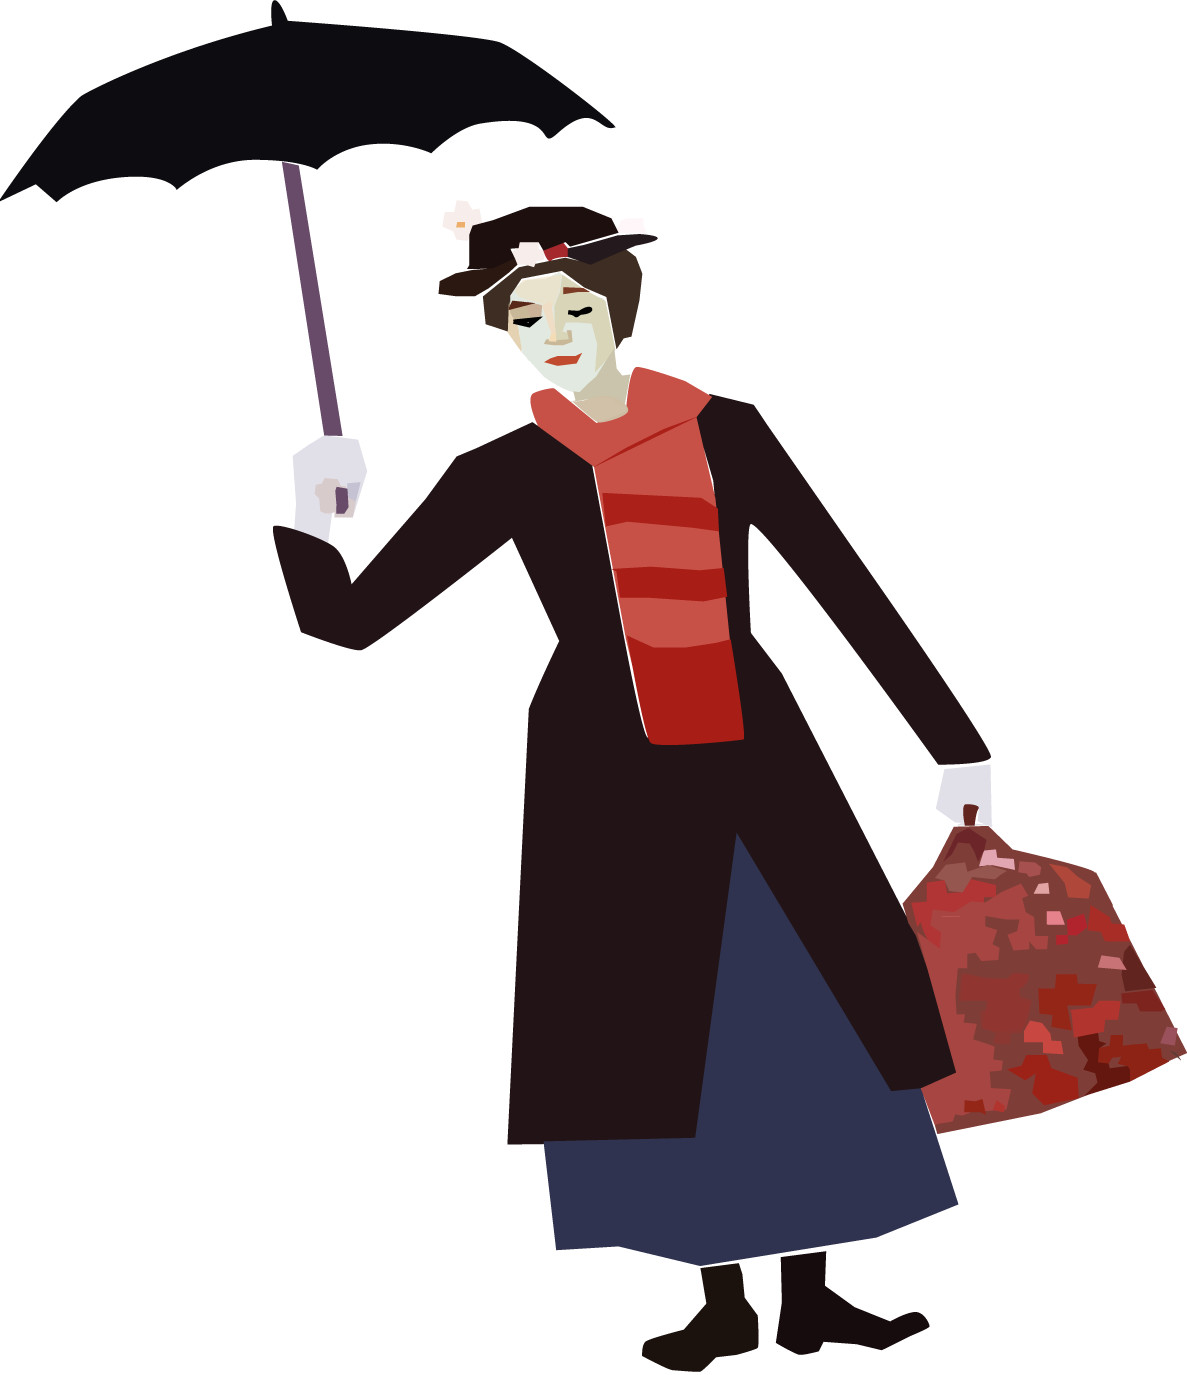 Mary Poppins Icon By Char15 On DeviantArt.